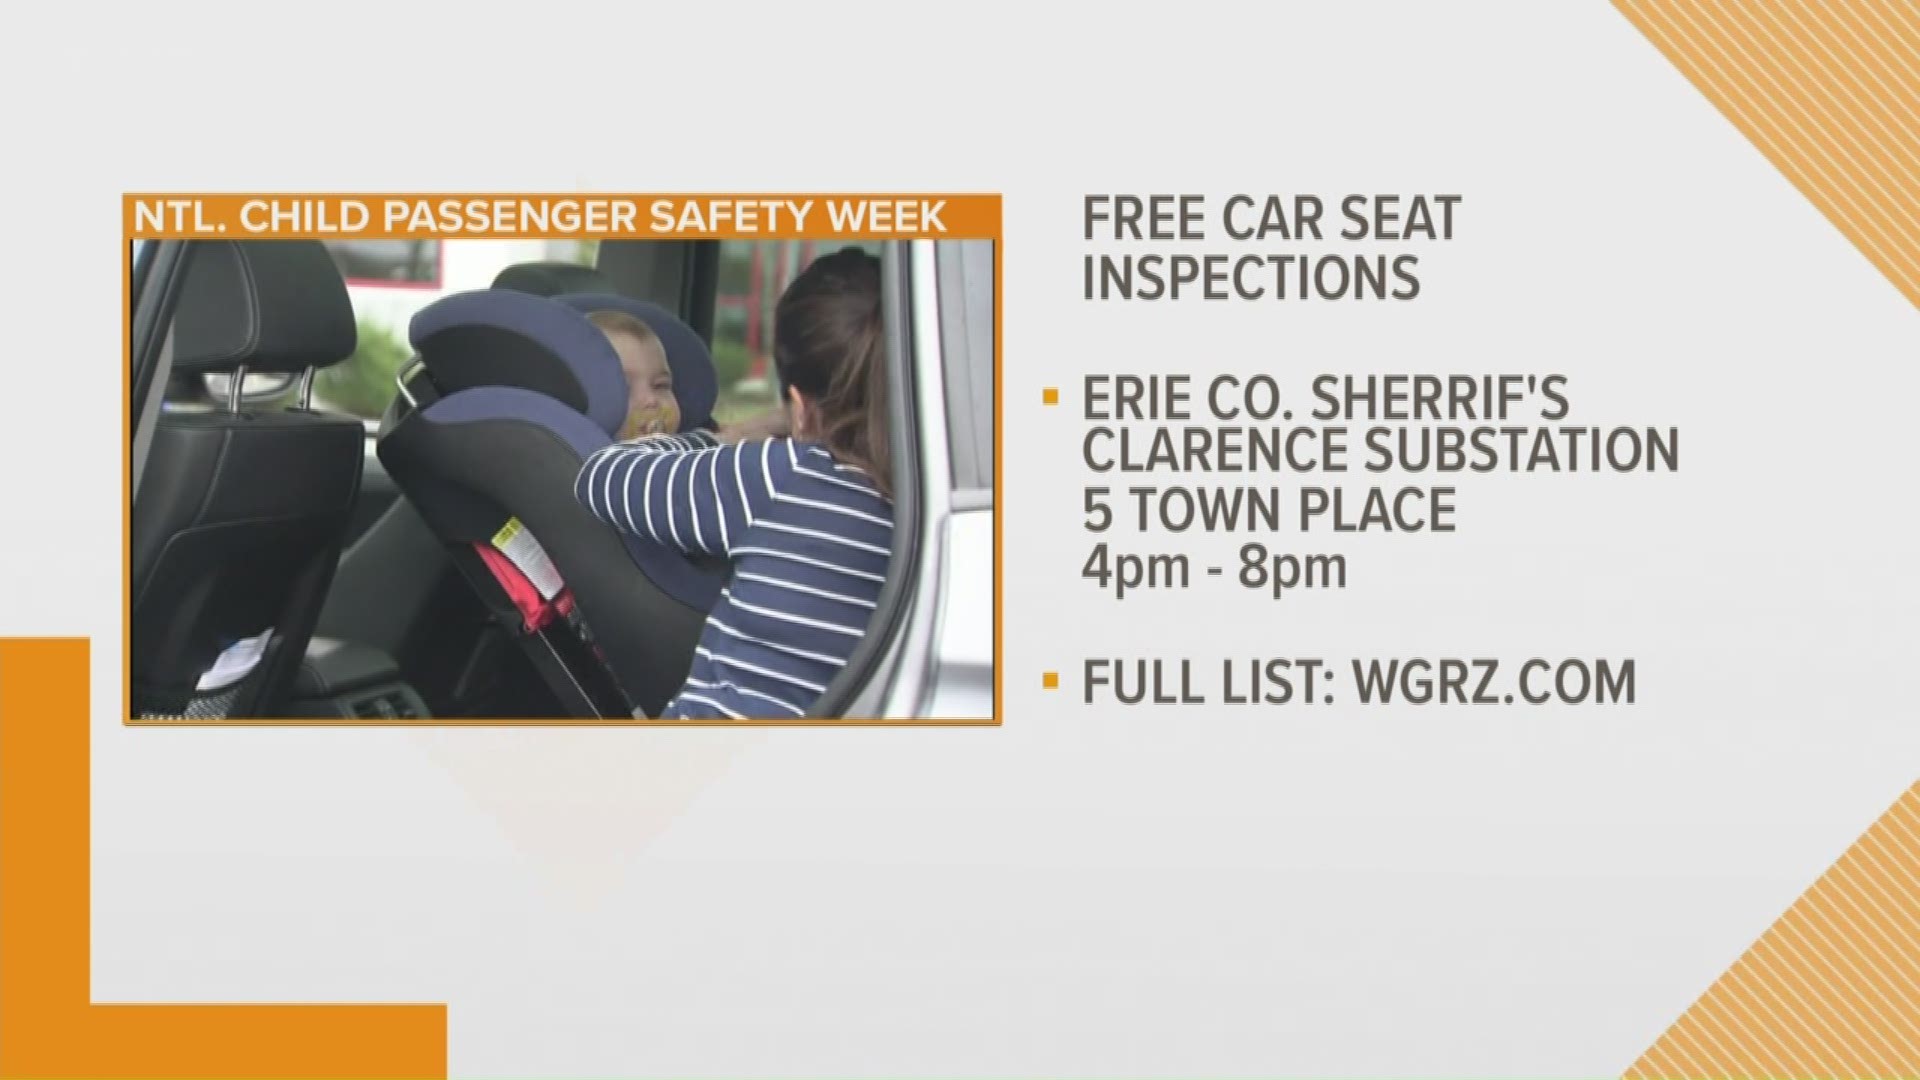 In honor of National Child Passenger Safety Week, the Erie County Sheriff's Office is hosting free car seat inspections at substations across Western New York.